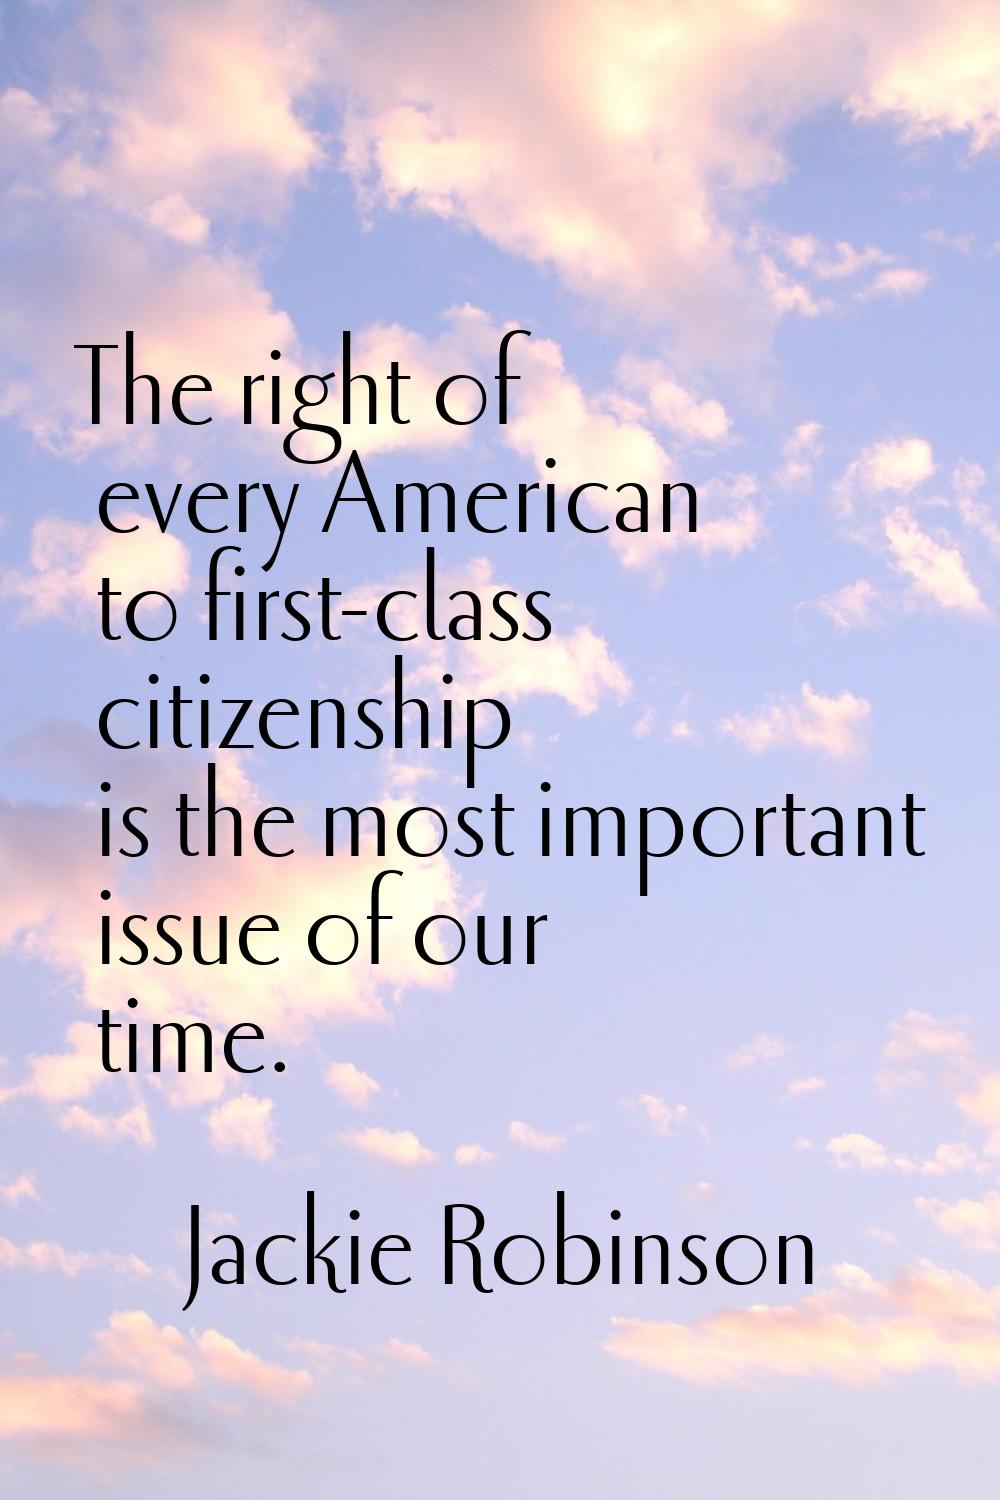 The right of every American to first-class citizenship is the most important issue of our time.